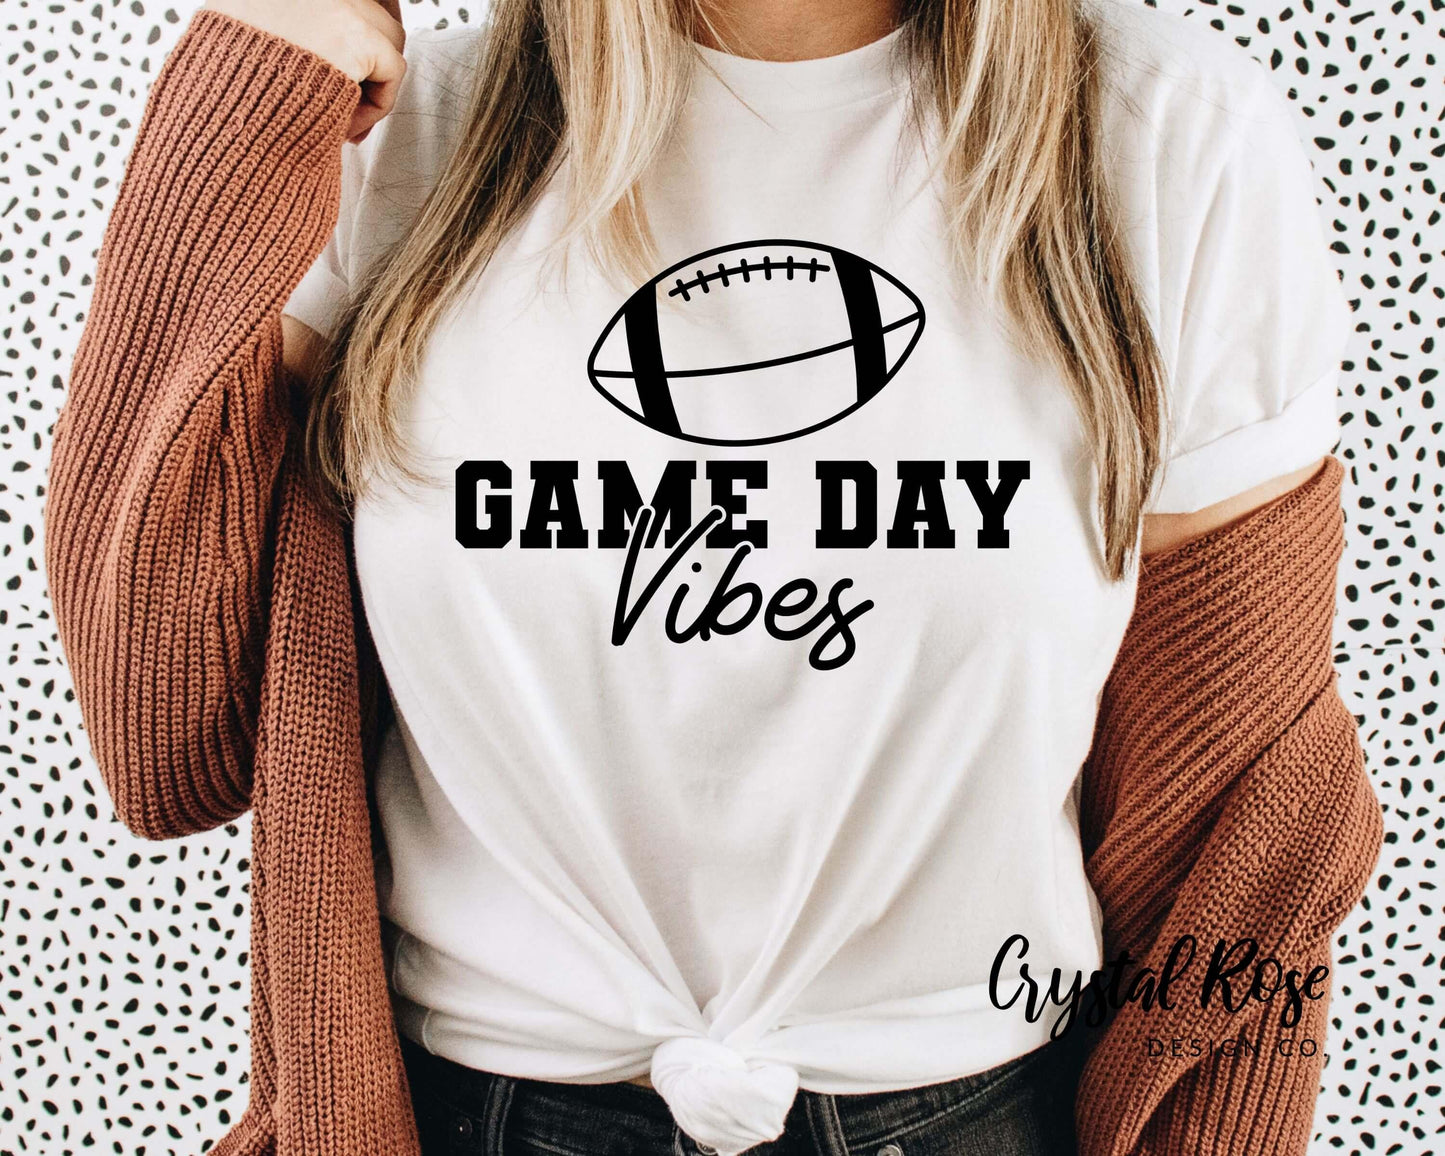 Game Day Vibes Short Sleeve Tee